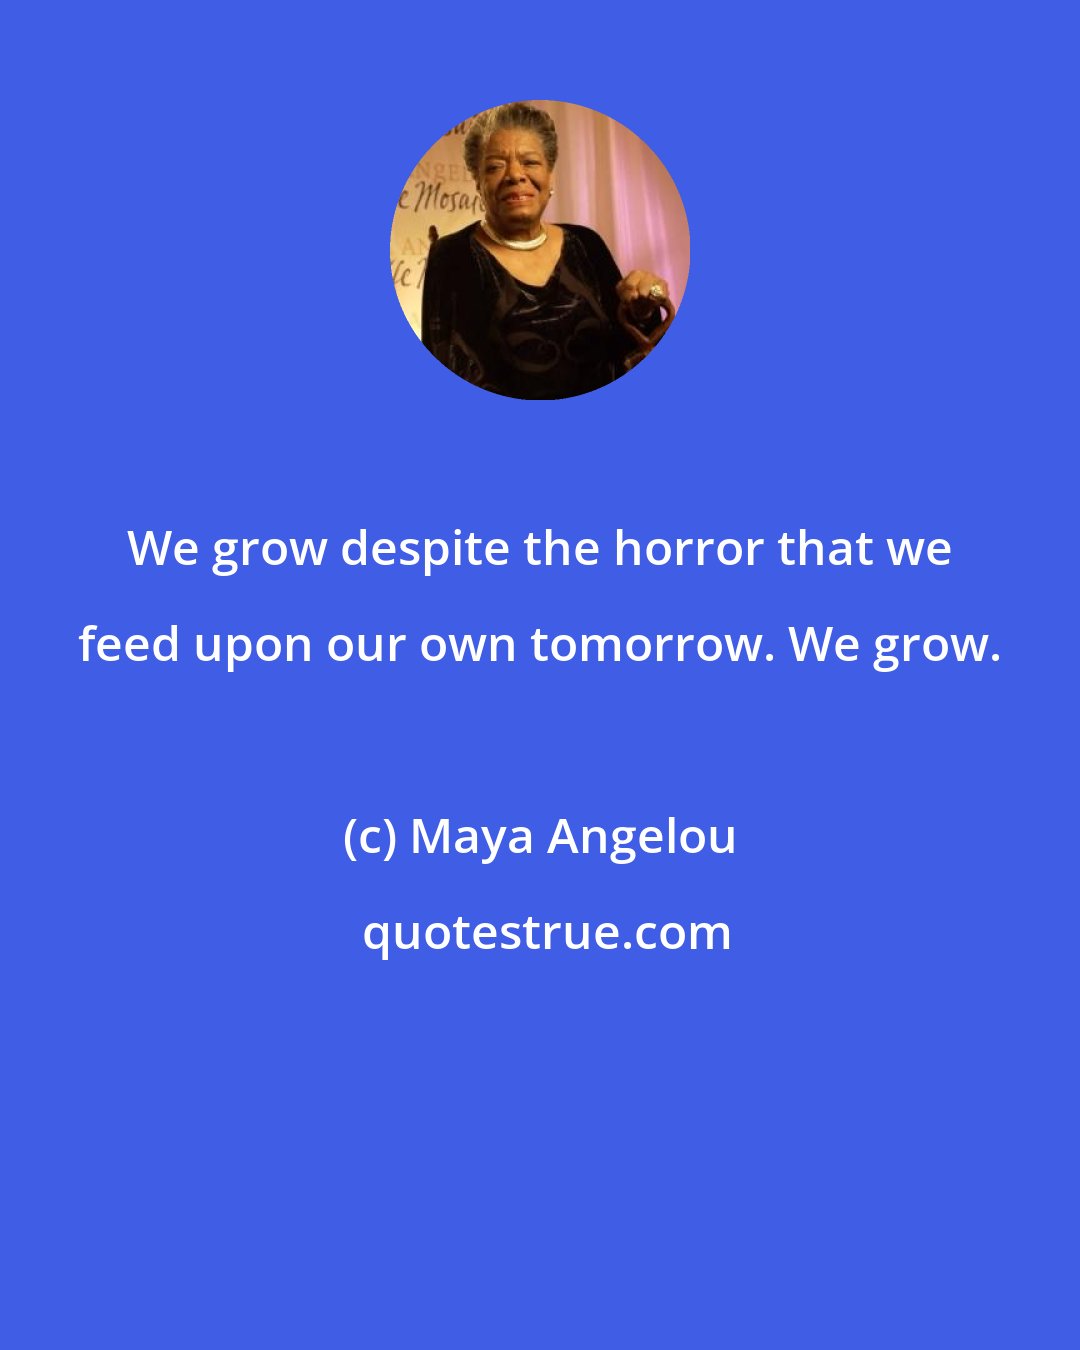 Maya Angelou: We grow despite the horror that we feed upon our own tomorrow. We grow.